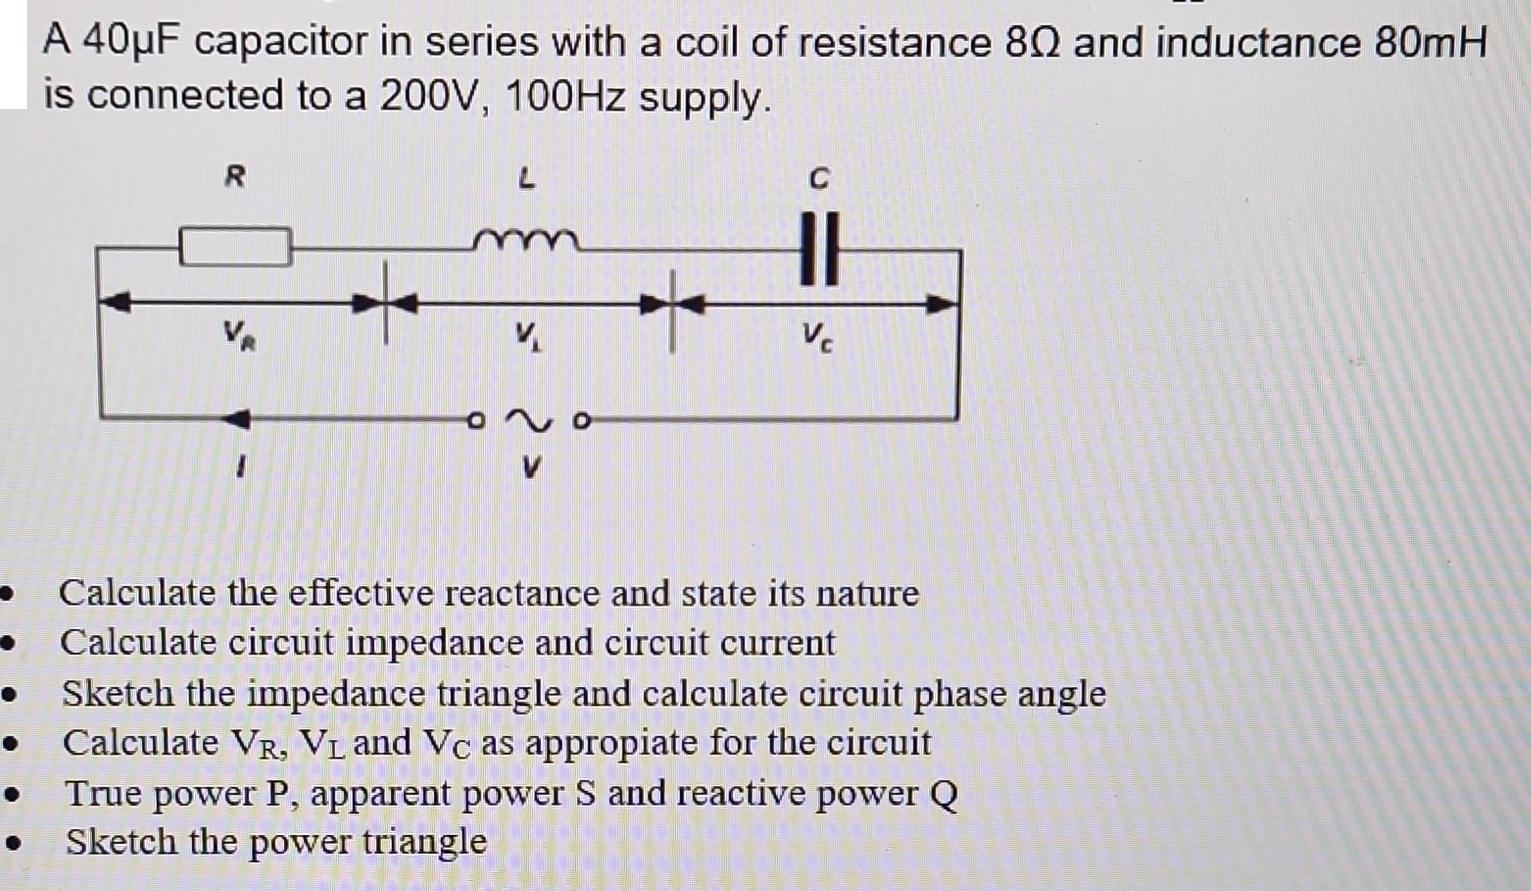 A 40F capacitor in series with a coil of resistance 80 and inductance 80mH is connected to a 200V, 100Hz